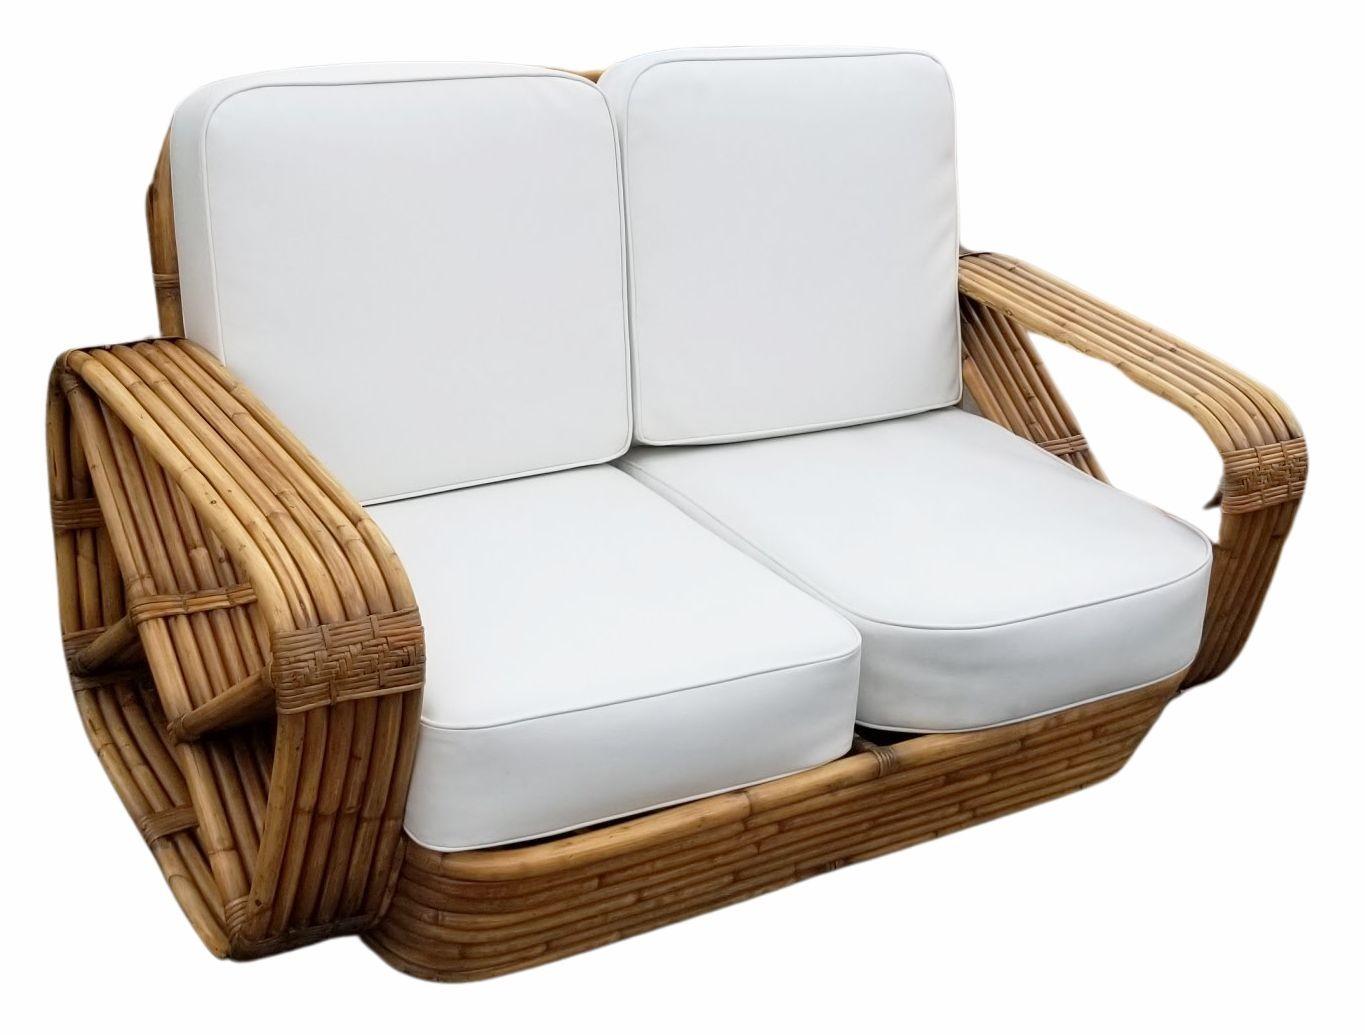 This is a rare museum quality restored rattan Paul Frankl living room set featuring a six-strand square pretzel settee and a matching lounge chair. Featuring Paul Frankl's signature arm wrappings.

This comes directly from a Paul Frankl decorated